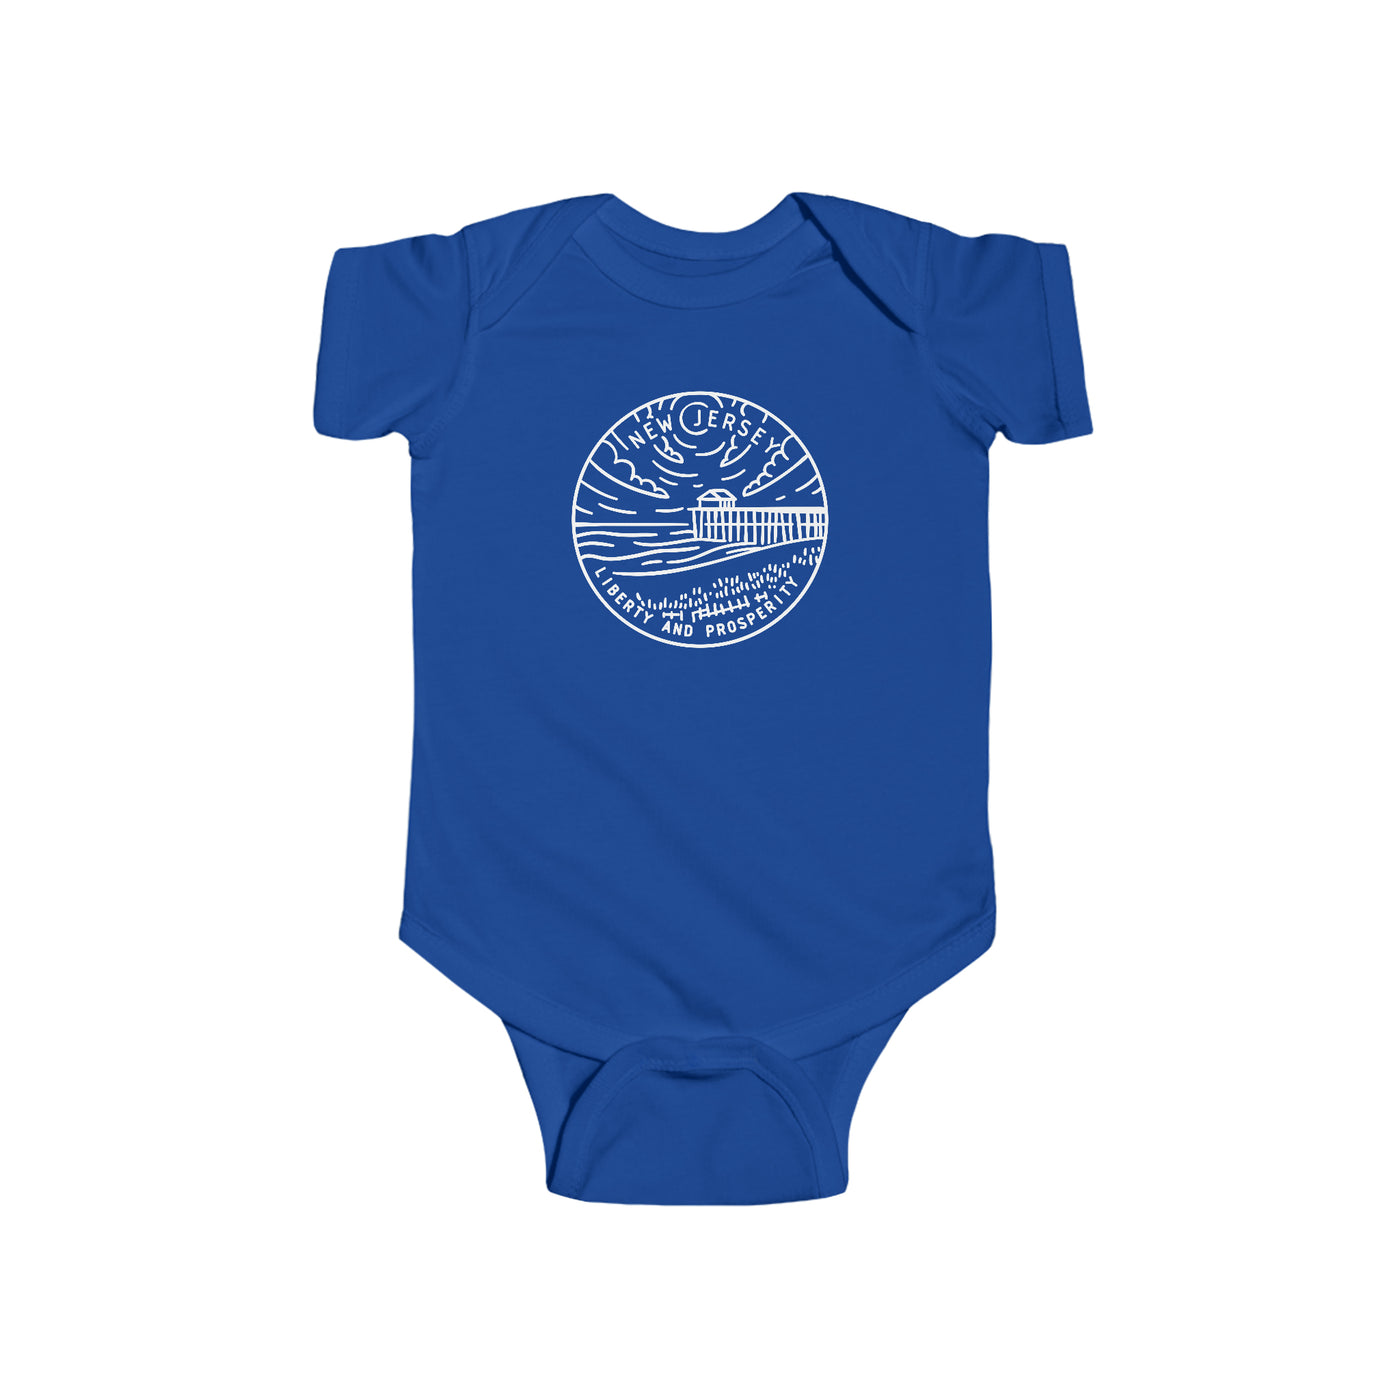 New Jersey State Motto Baby Bodysuit